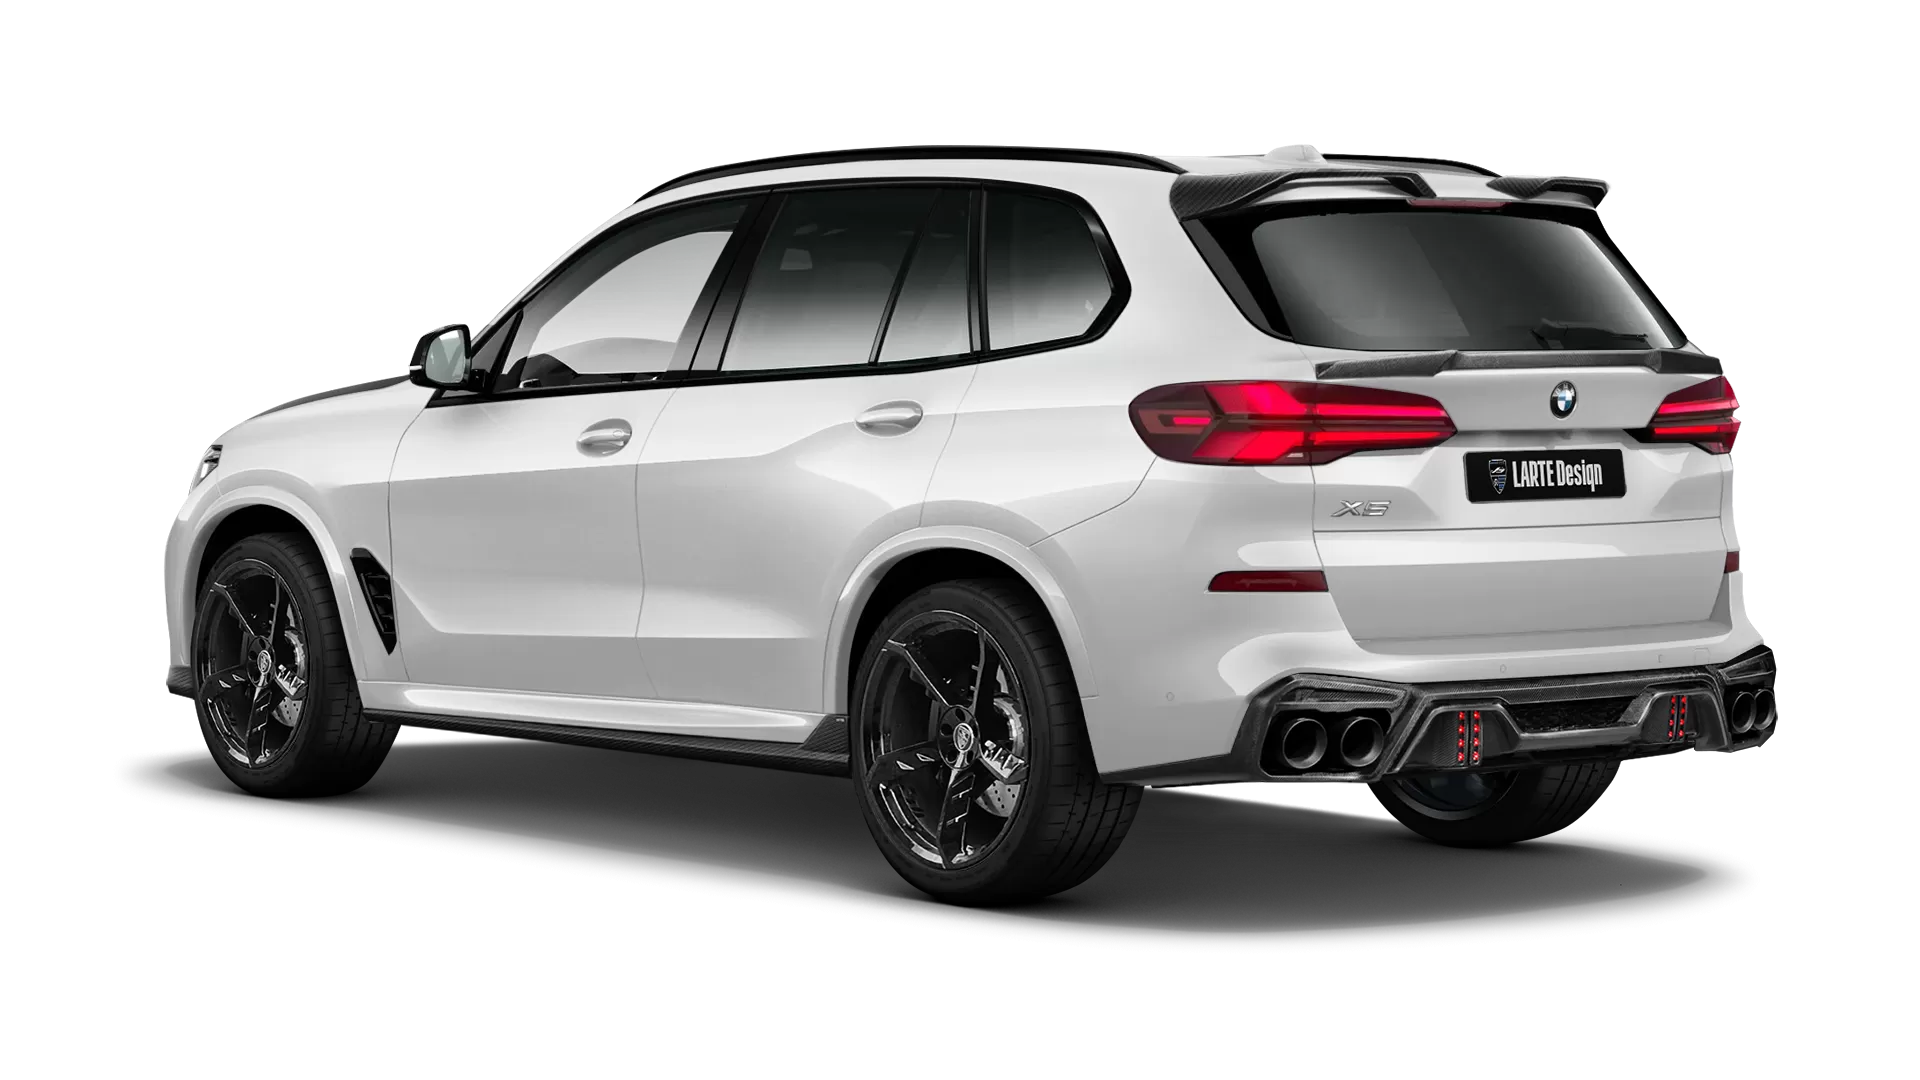 BMW X5 G05 LCI Facelift with carbon body kit: back view shown in Mineral White